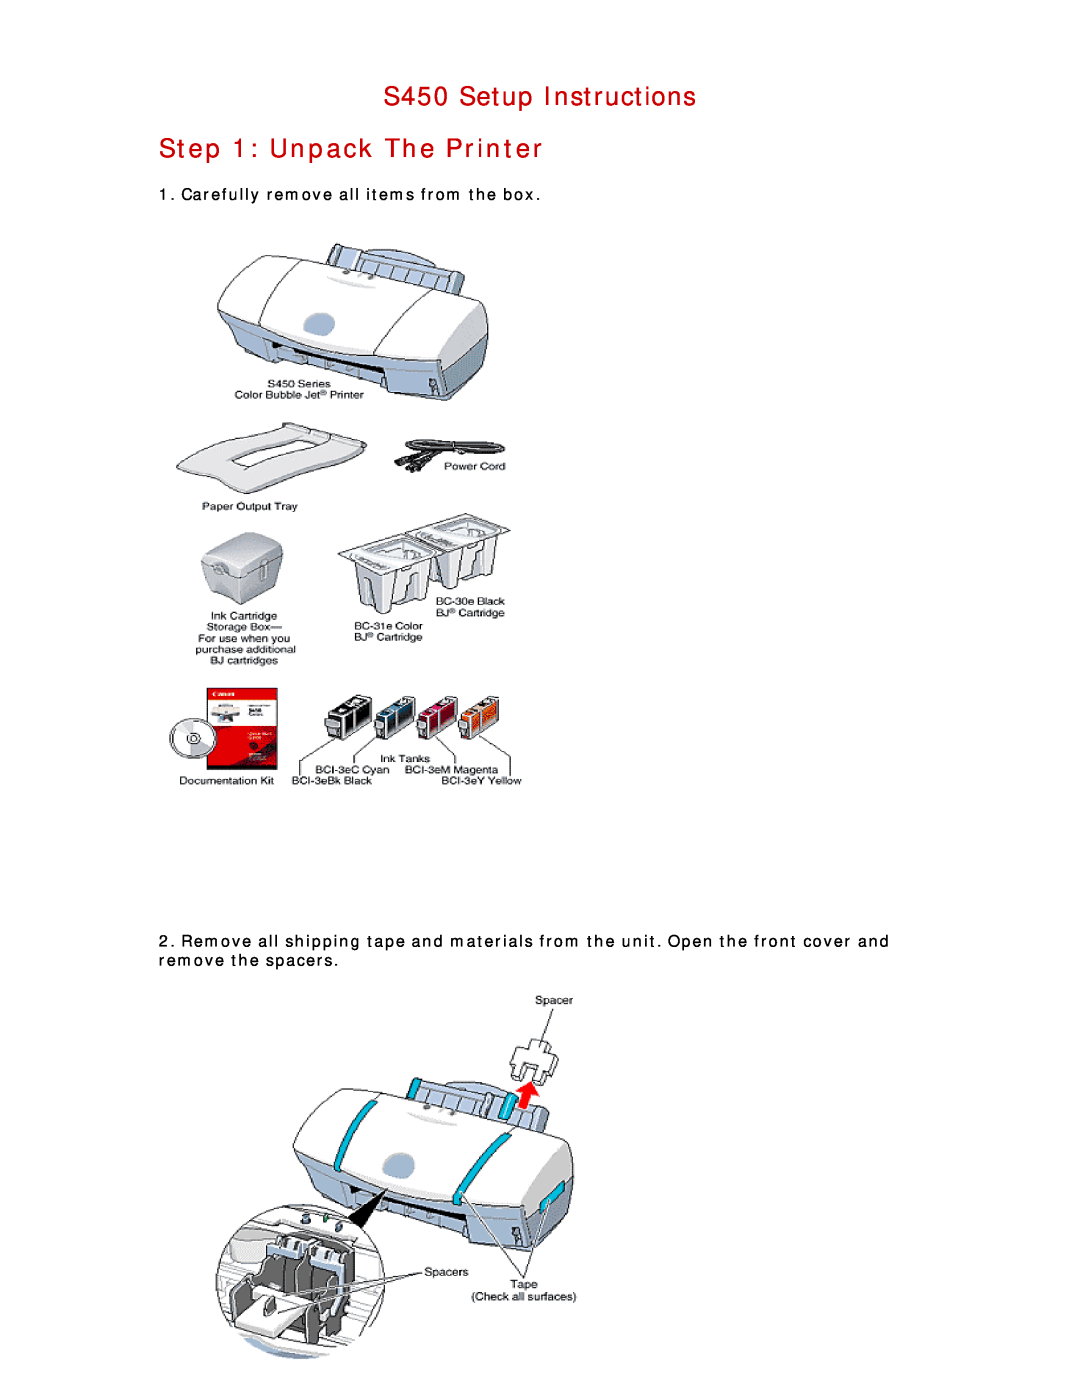 Canon manual Unpack The Printer, S450 Setup Instructions, Carefully remove all items from the box 